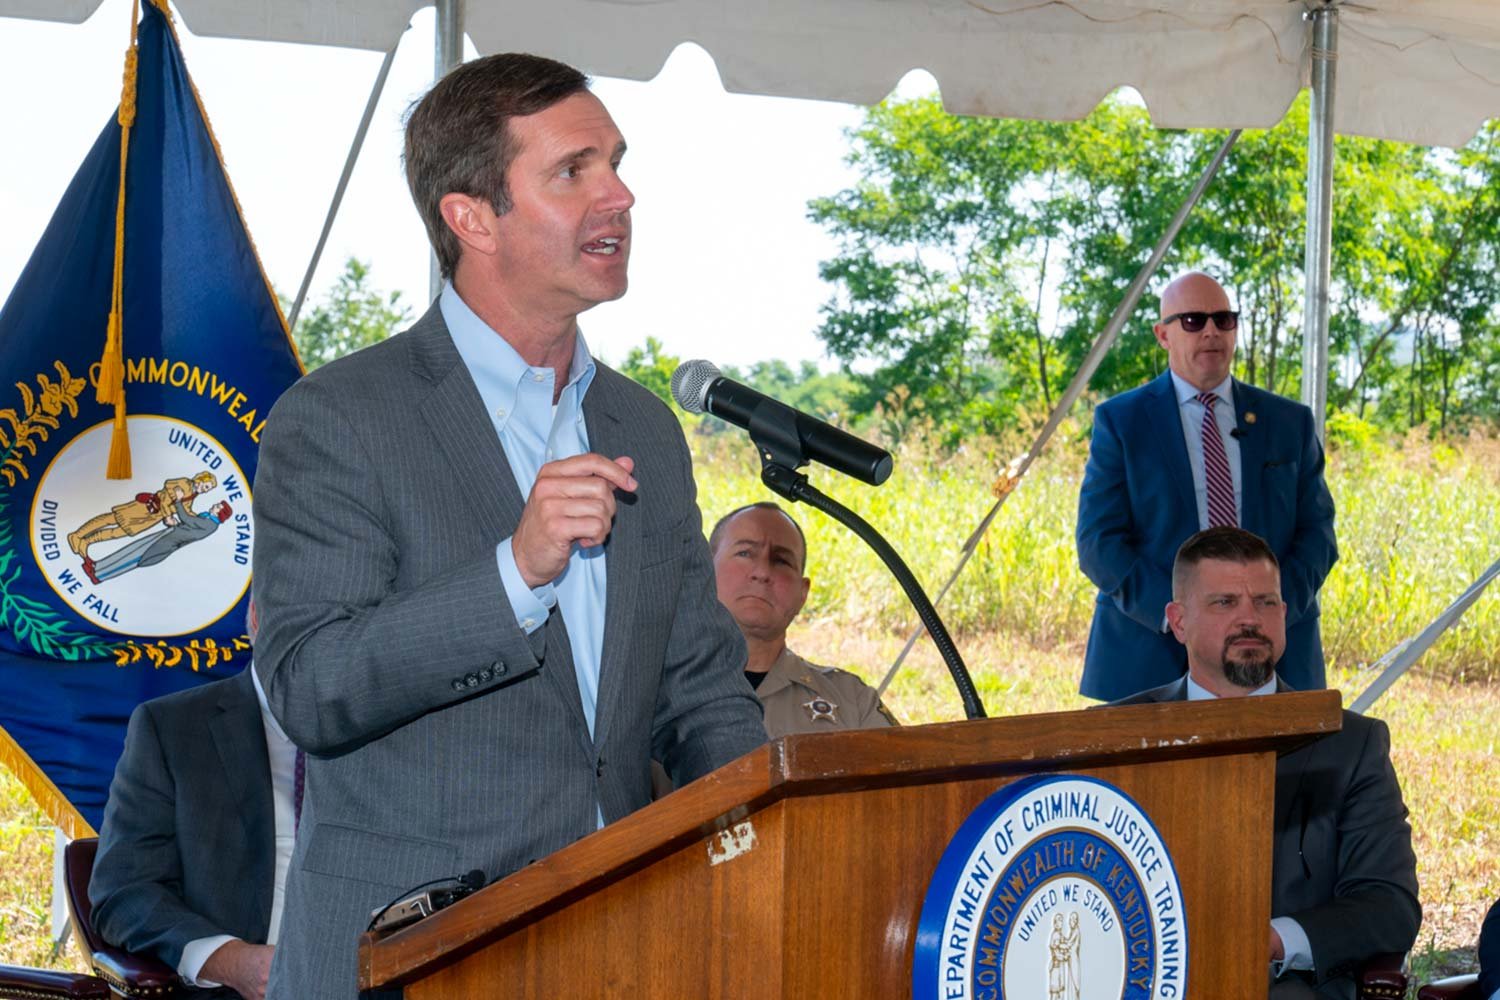  Gov. Andy Beshear told the crowd gathered about the importance of having facilities to properly train Kentucky’s law enforcement officers during Monday’s groundbreaking ceremony. (Photo by Jim Robertson) 